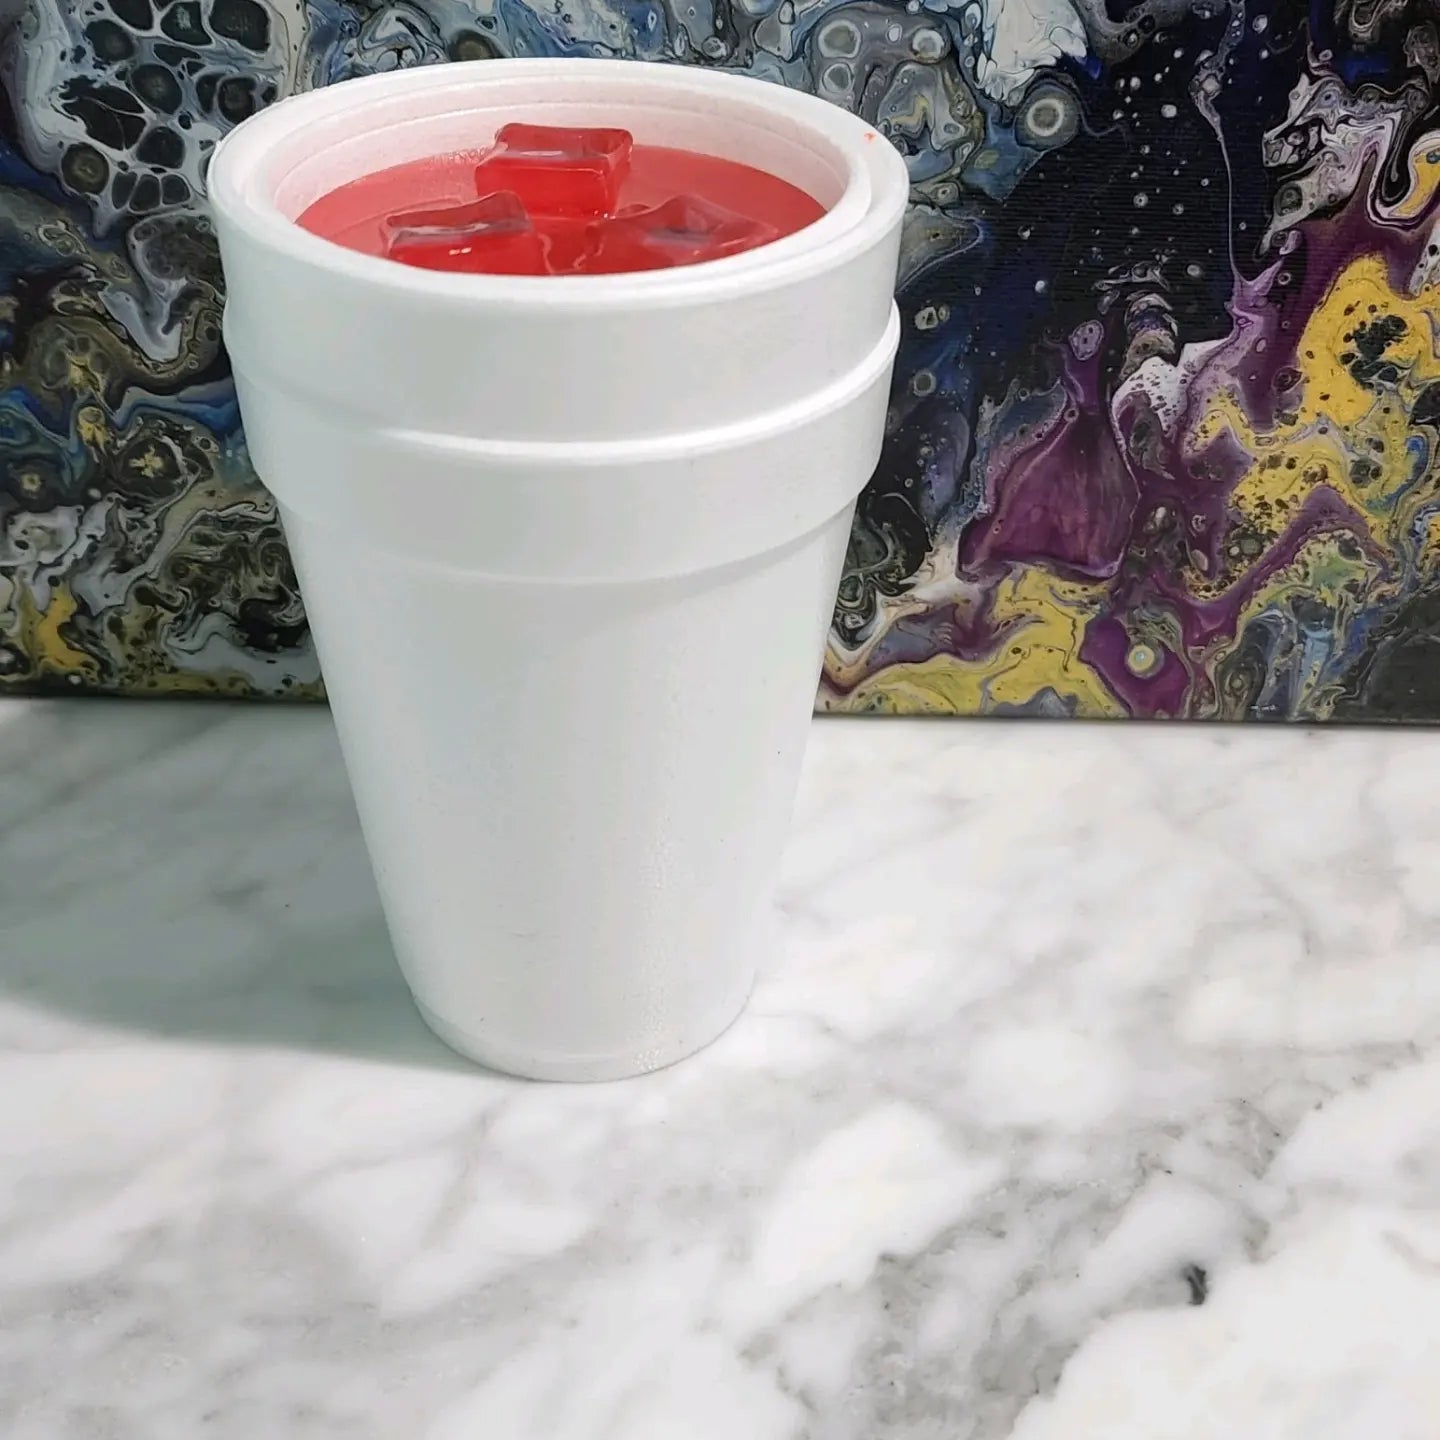 Double cup stash cup